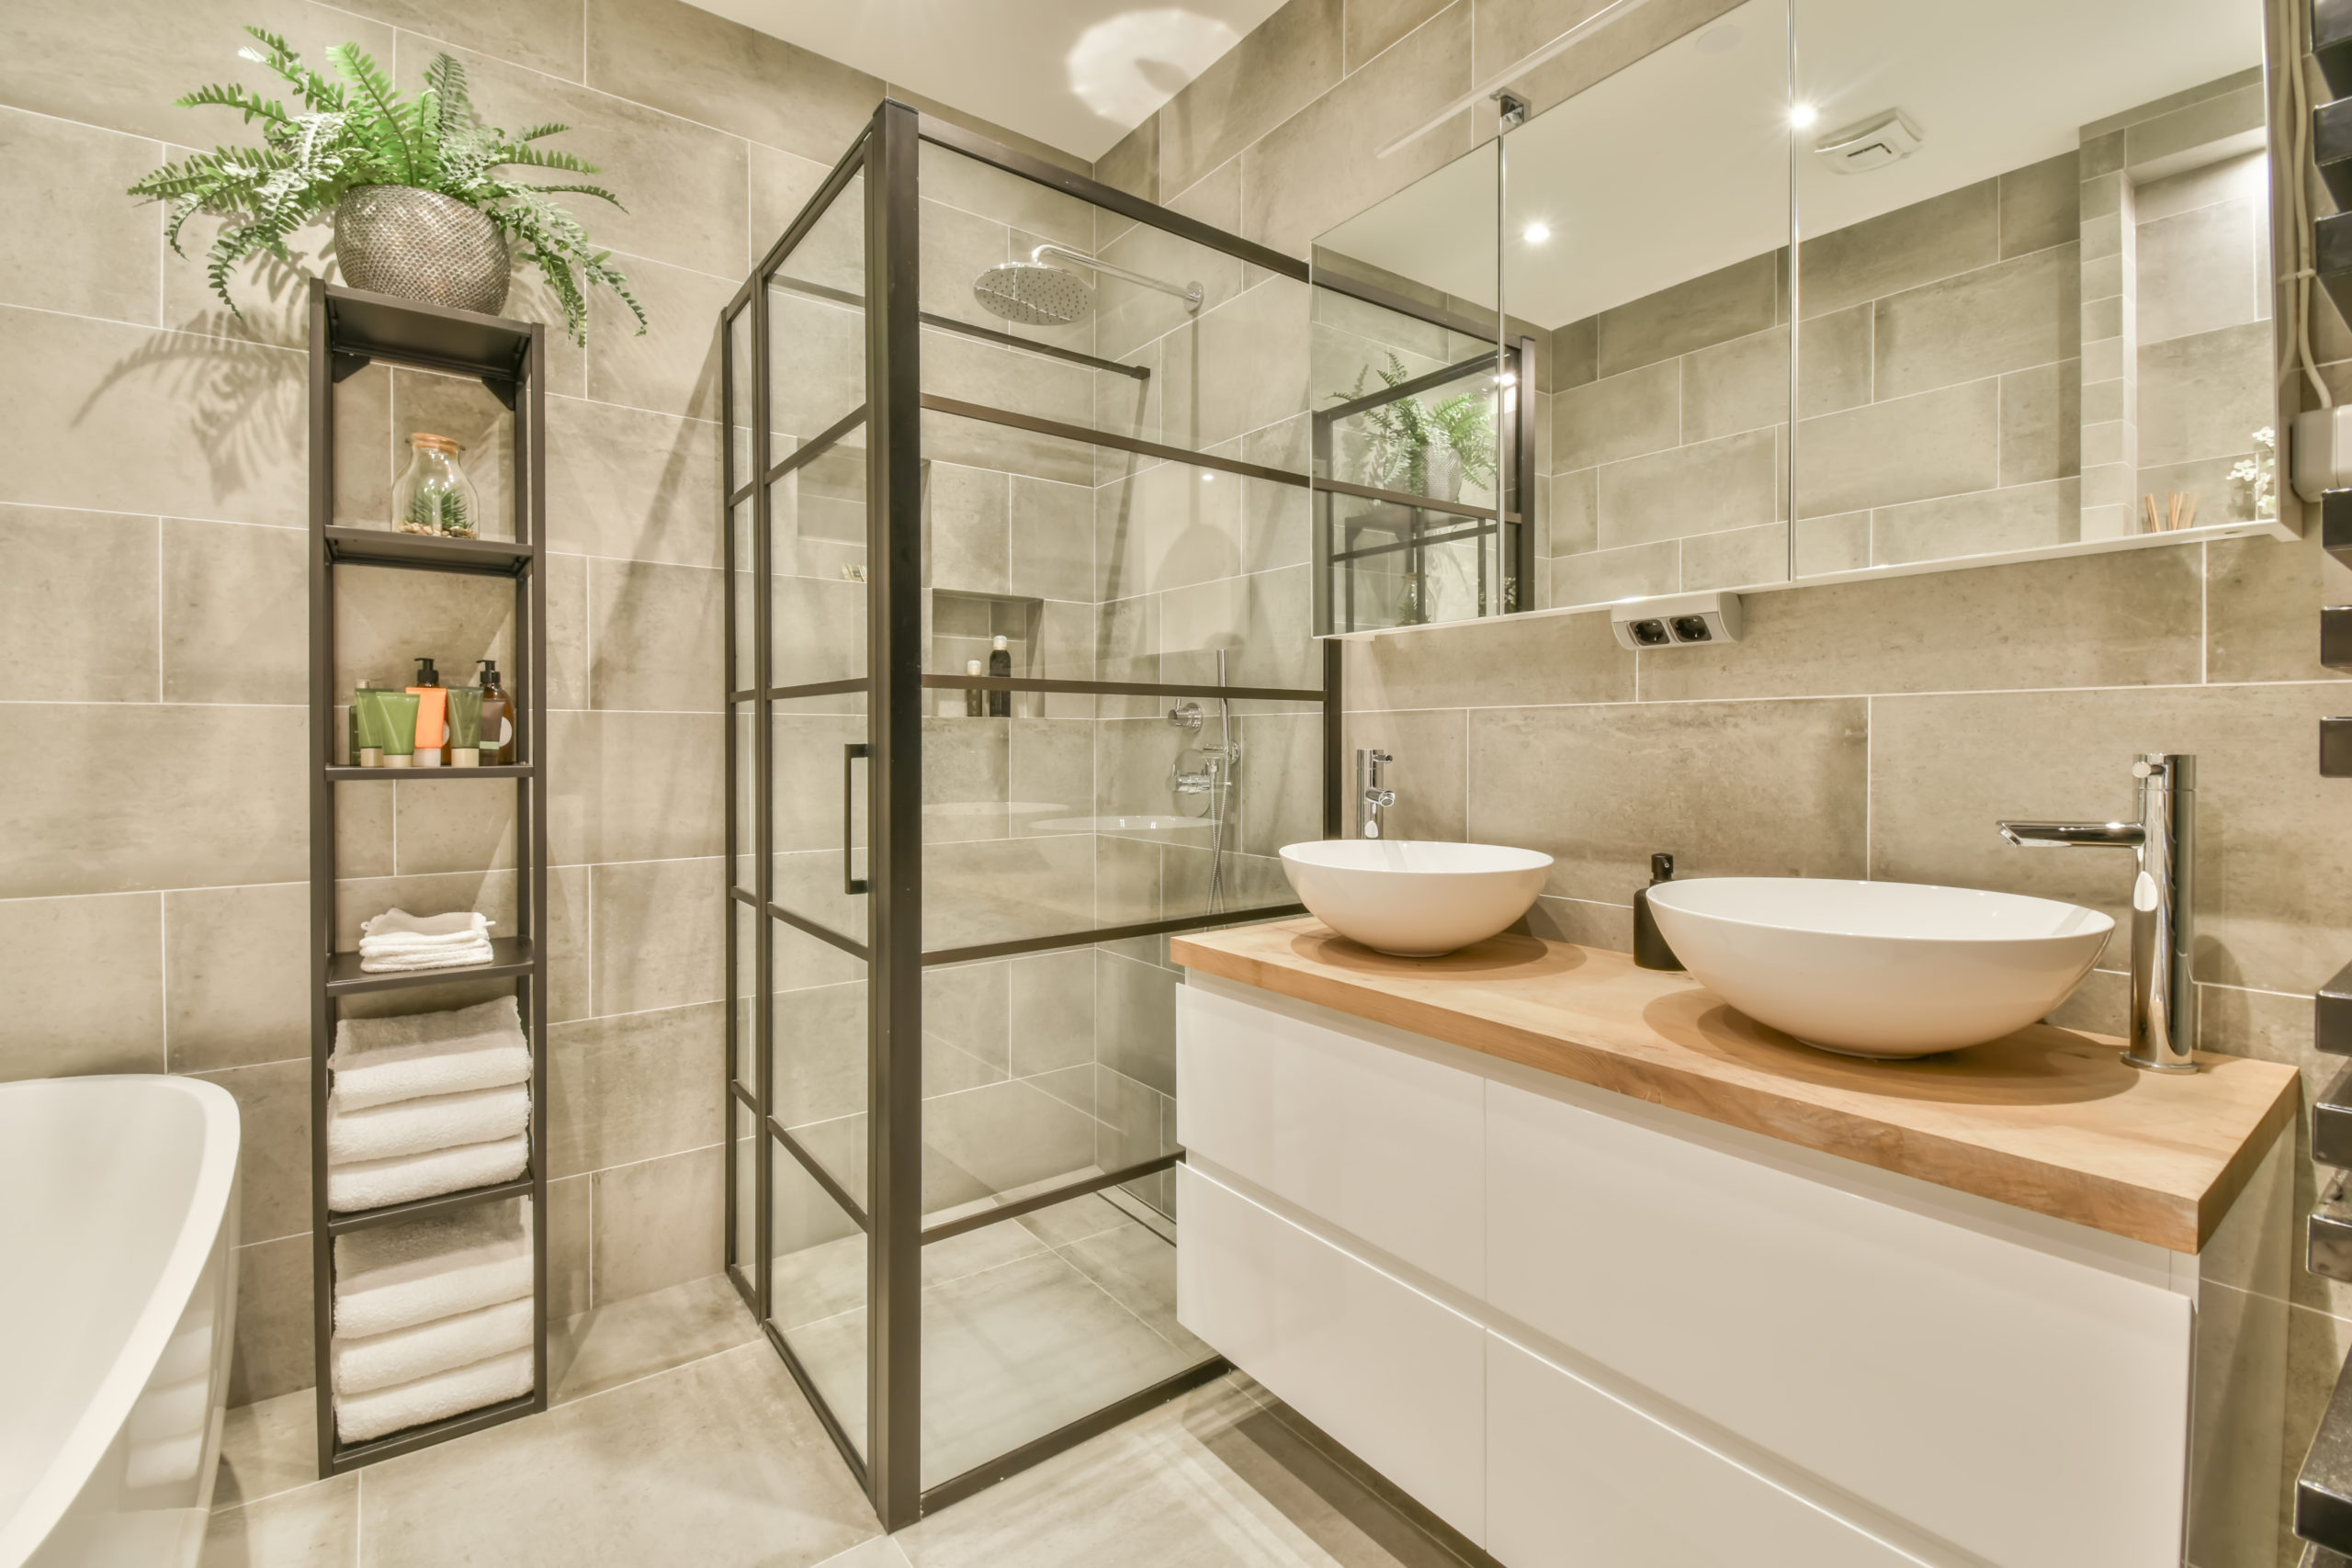 Tips for Stocking Up Your Bathroom